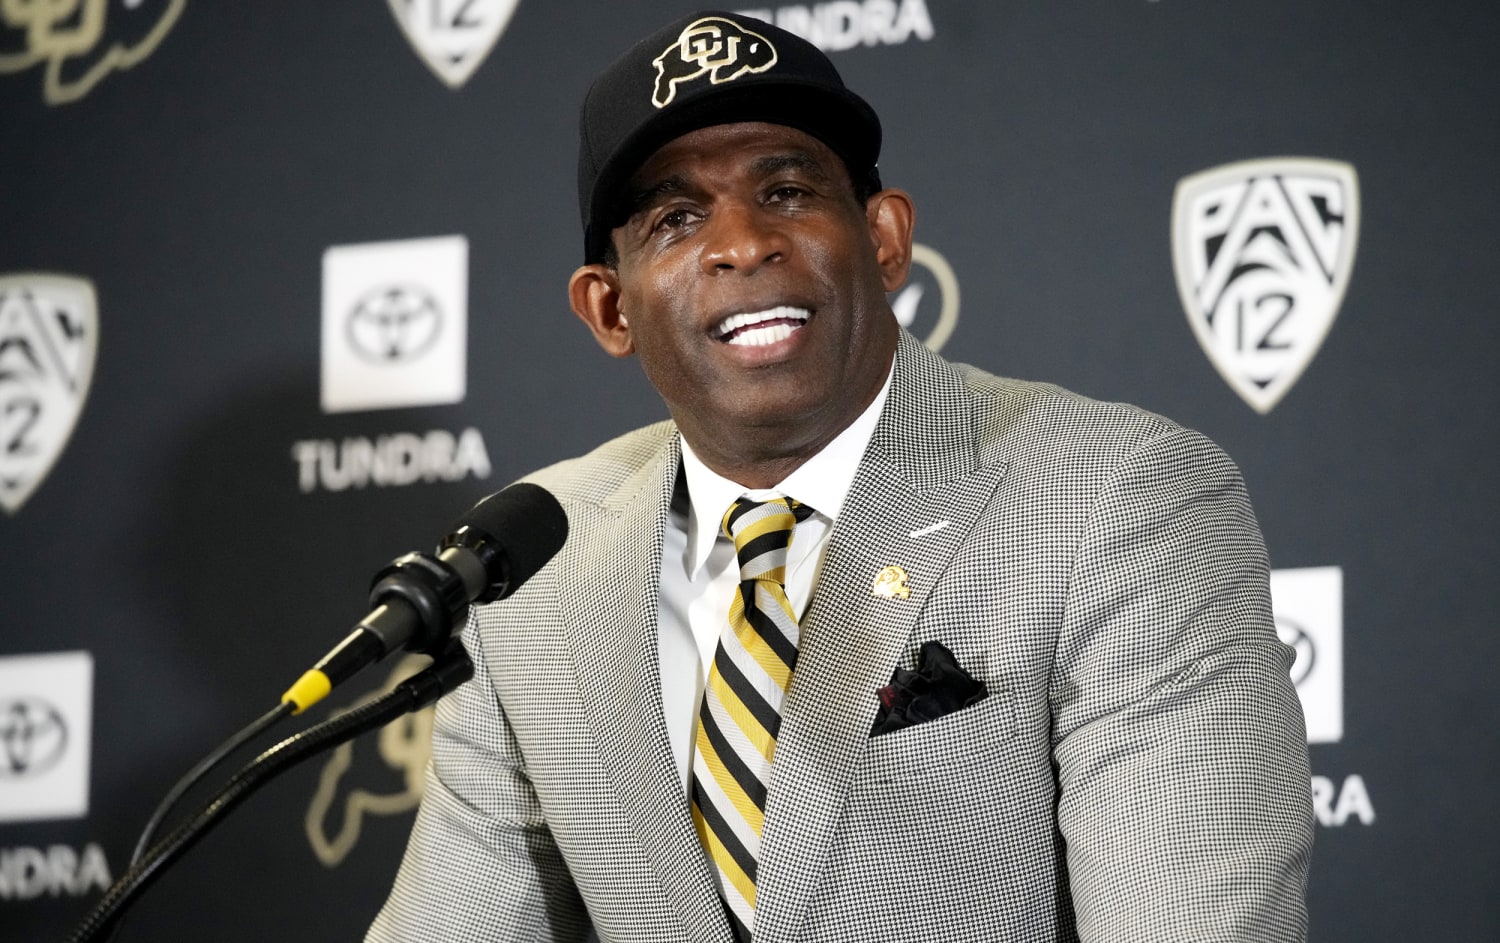 Deion Sanders Net Worth, Age, Height, Parents And More